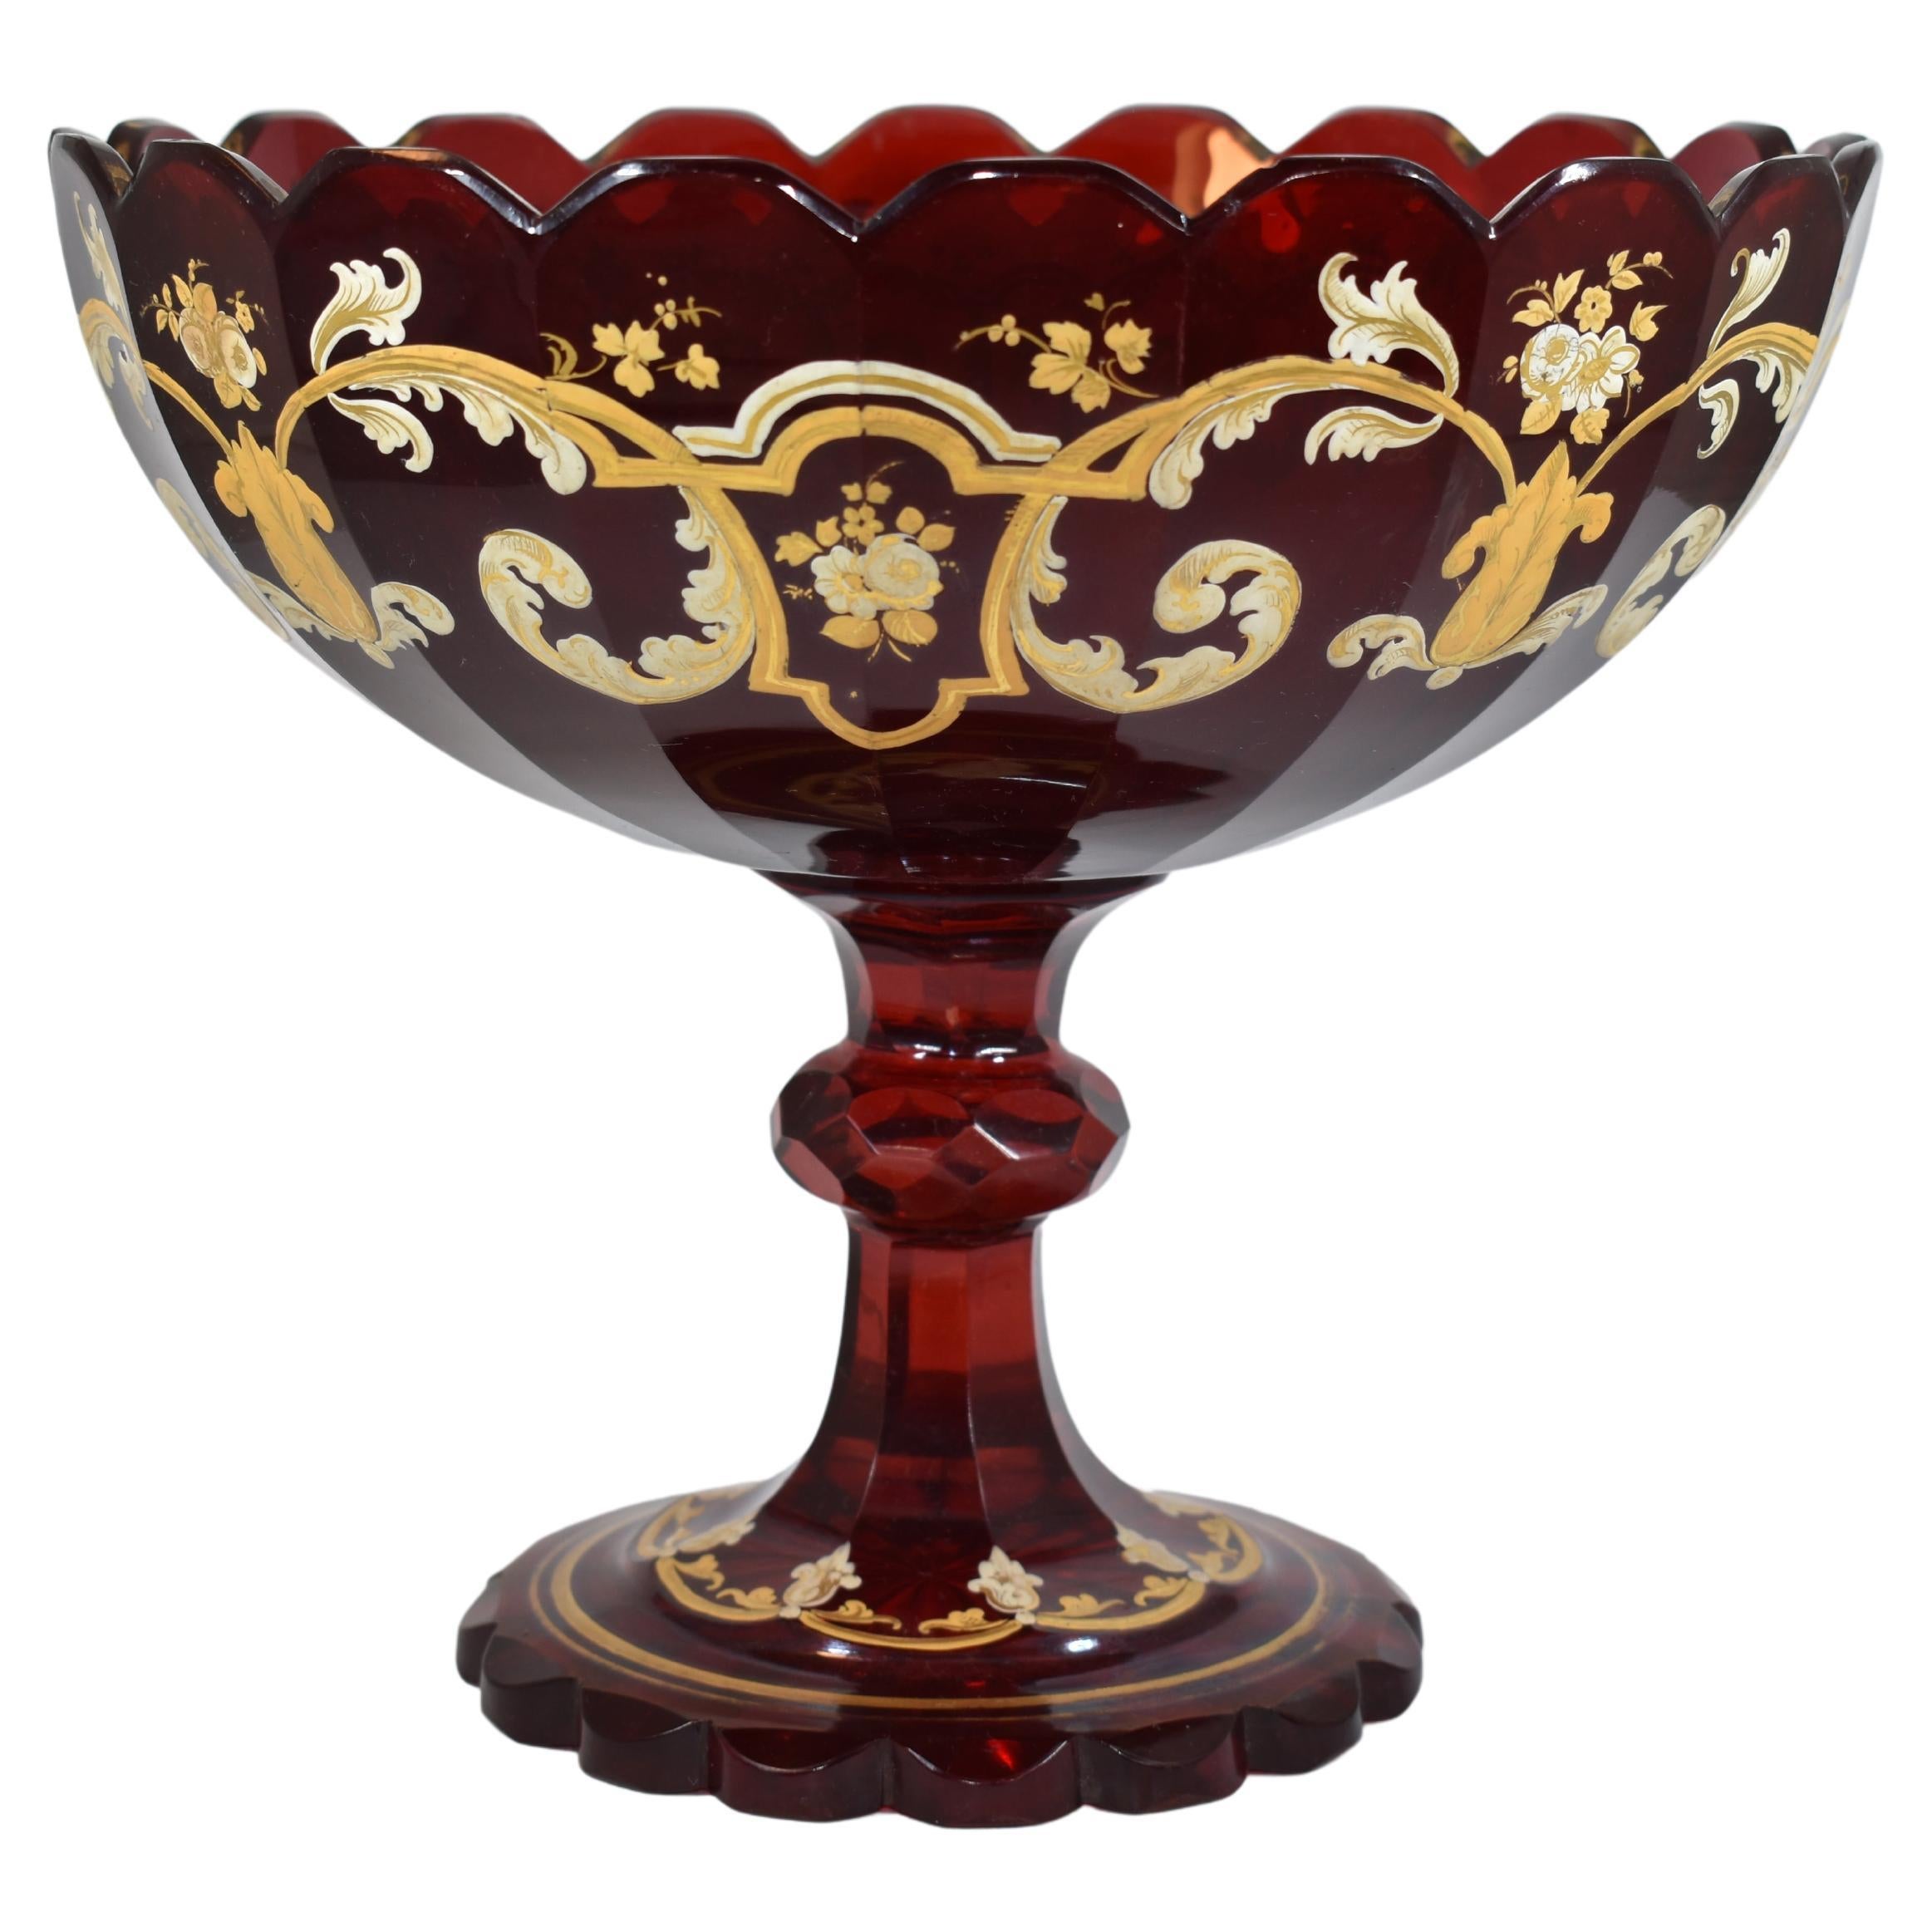 Large Antique Bohemian Ruby Red Enameled Glass Tazza Bowl, 19th Century For Sale